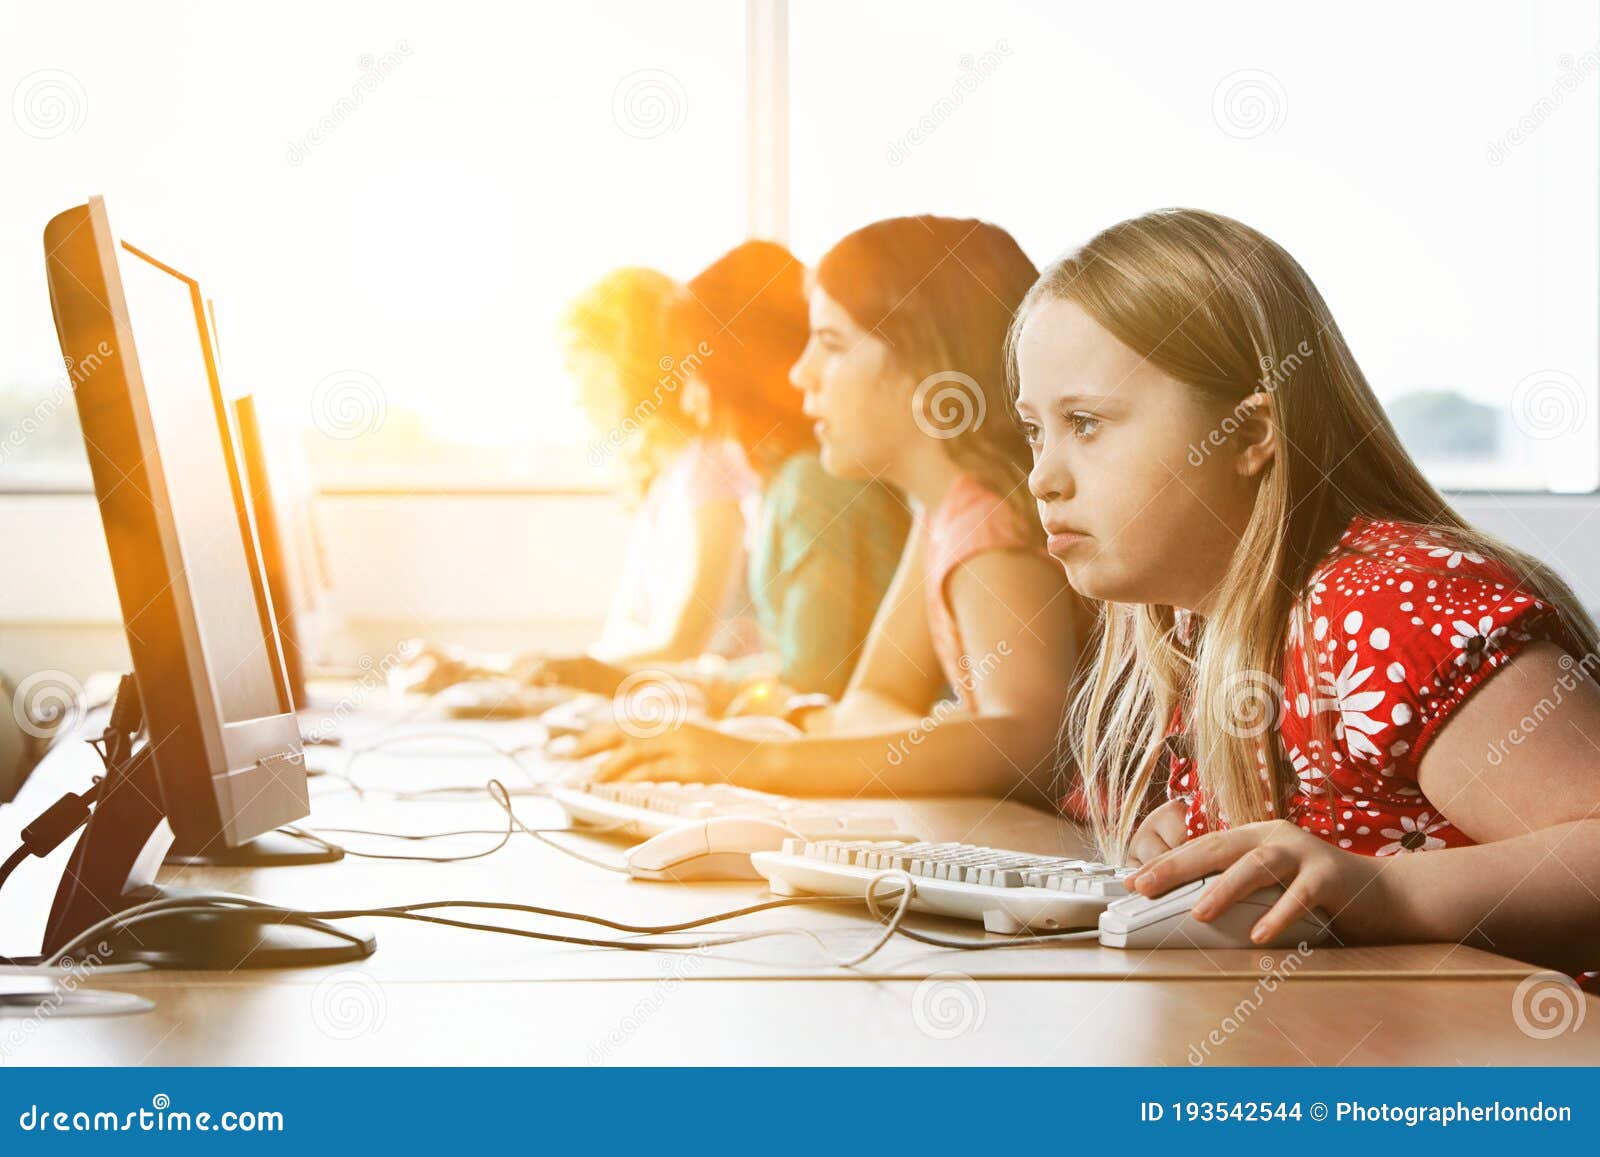 girl with down syndrome using computer at school